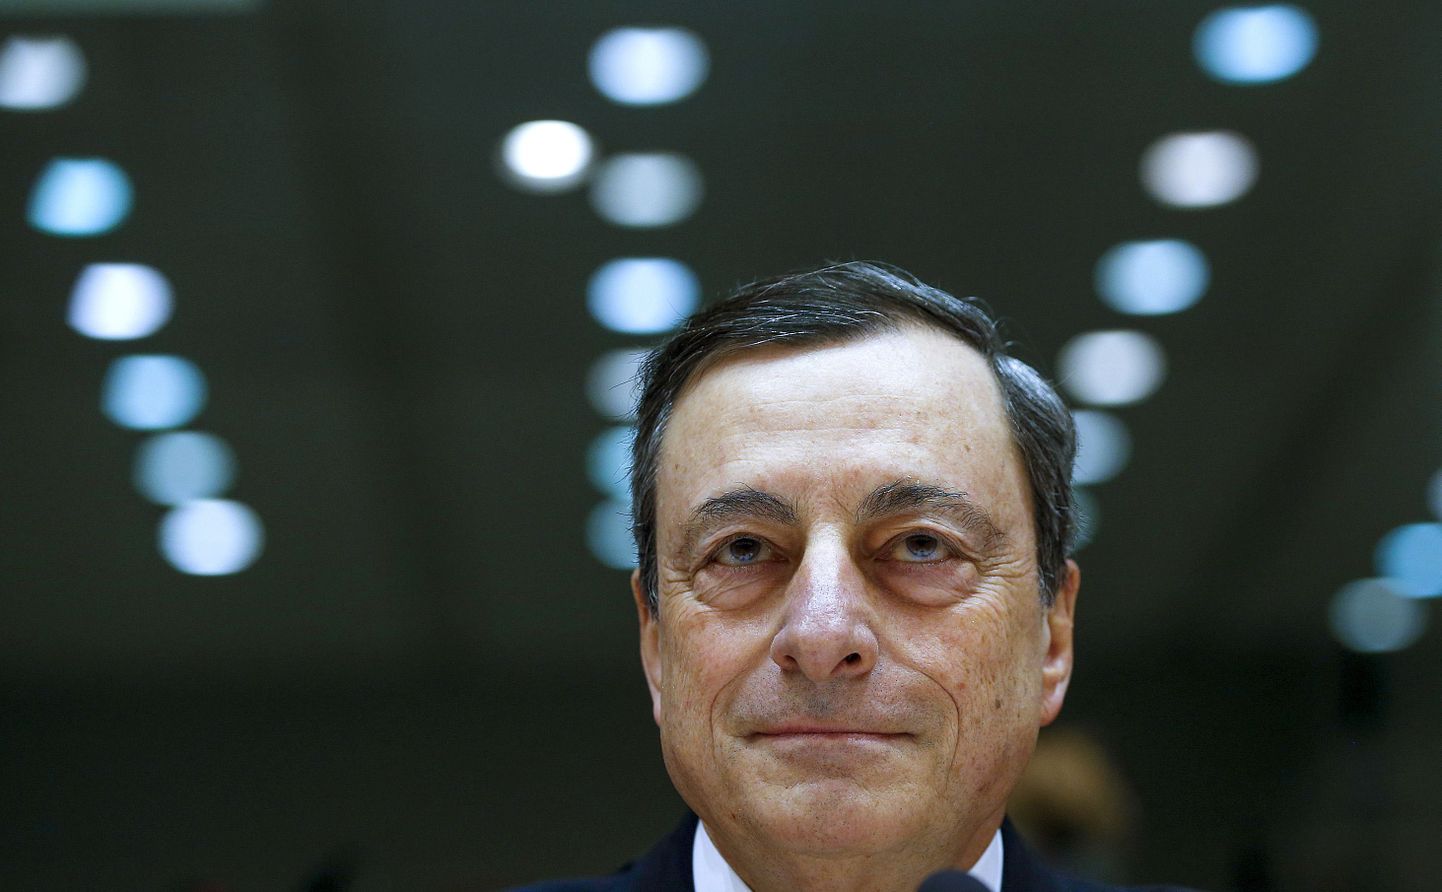 European Central Bank (ECB) President Mario Draghi testifies before the European Parliament's Economic and Monetary Affairs Committee in Brussels, Belgium, February 15, 2016.  REUTERS/Yves Herman